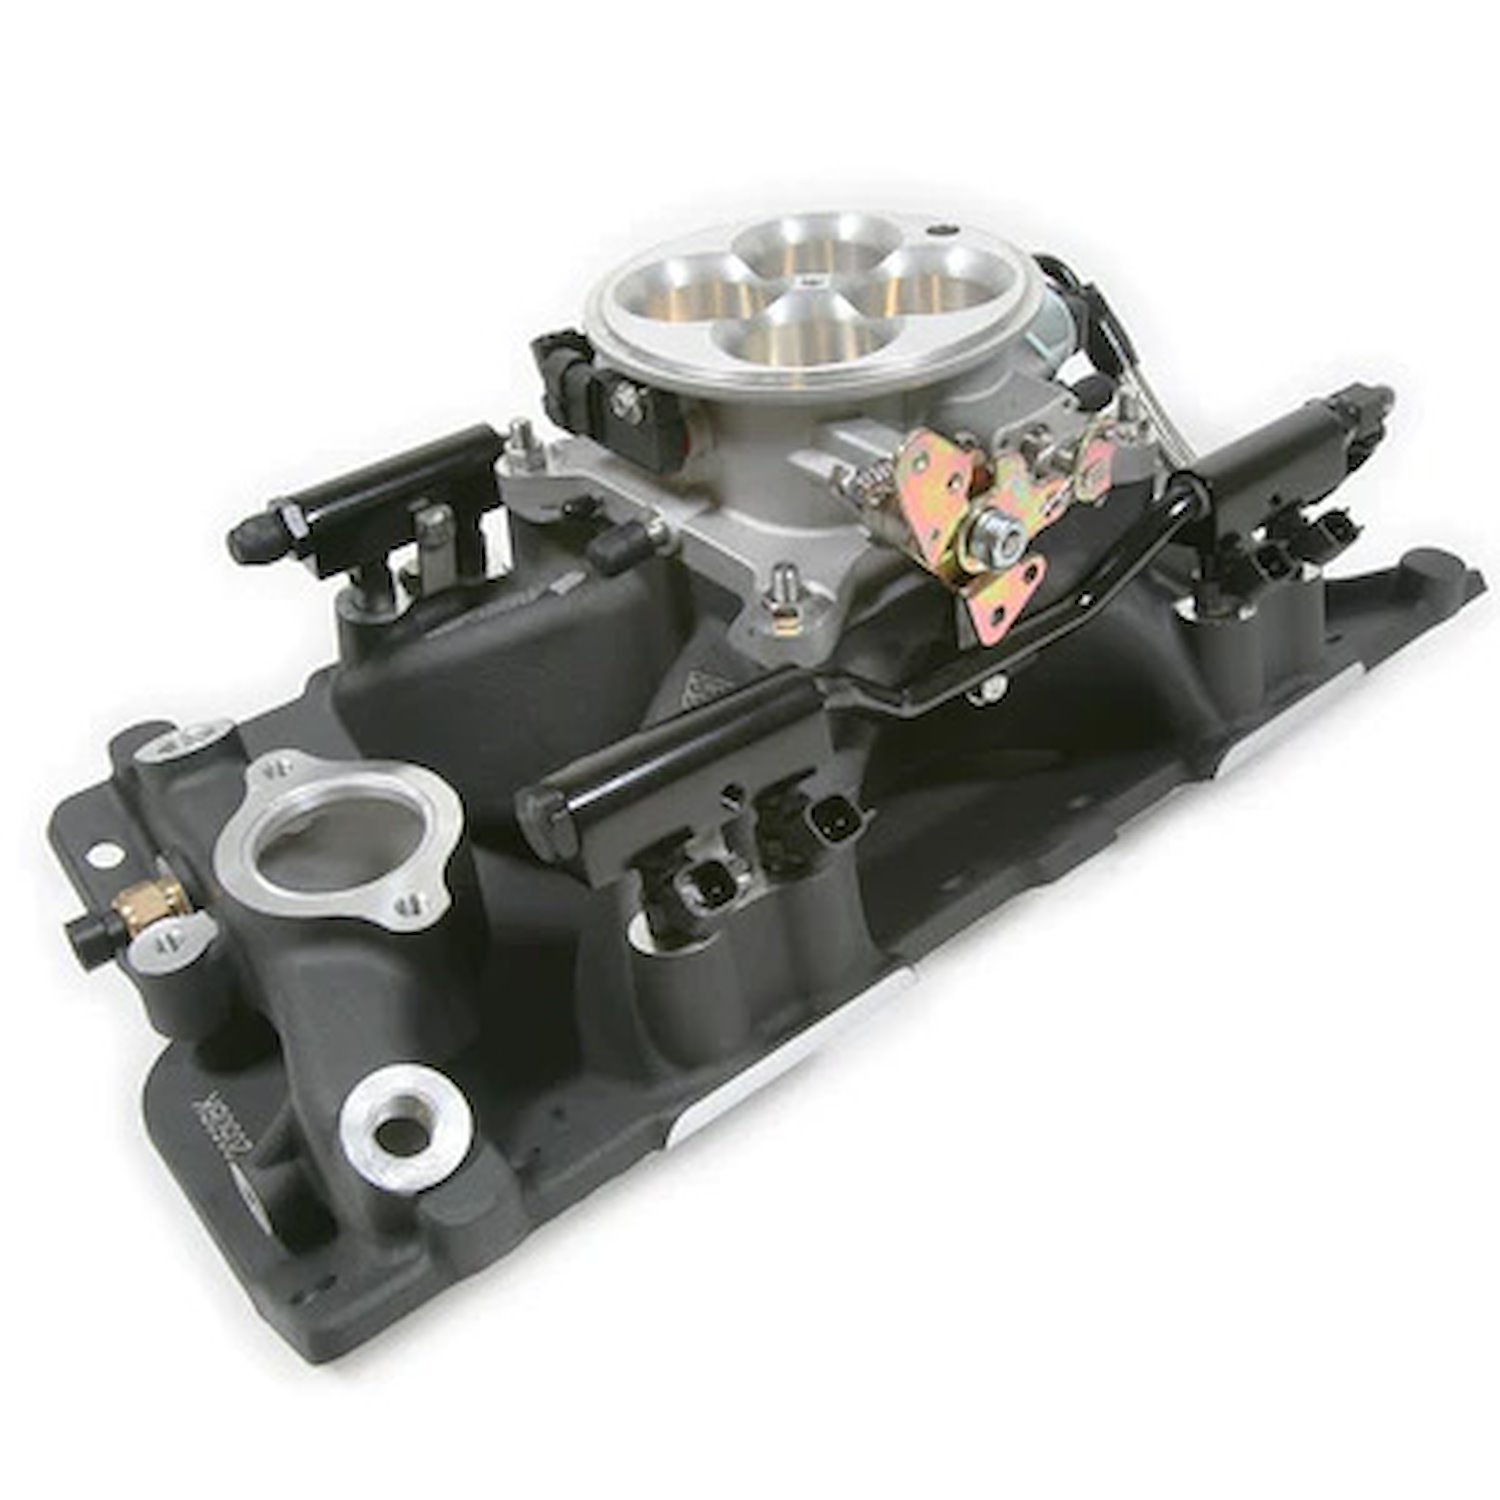 AS2015P-SBC-B4150 The Joker EFI Standalone Management System, Small Block Chevy, with Black 4150 Intake Manifold